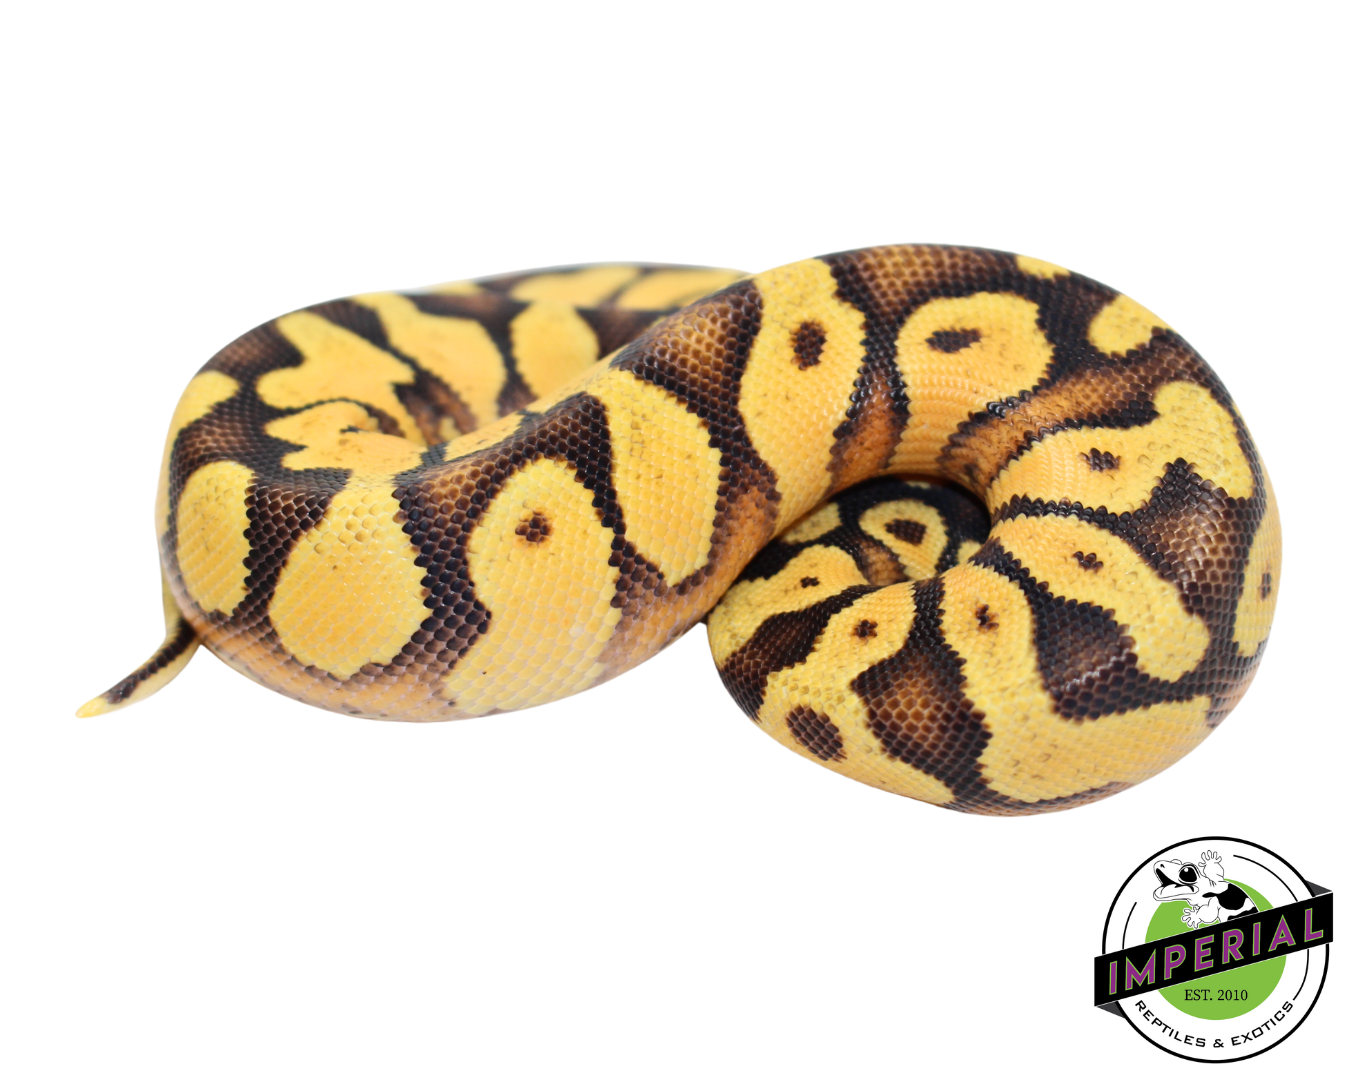 pastel enchi yellowbelly ball python for sale, reptiles for sale, buy animals online